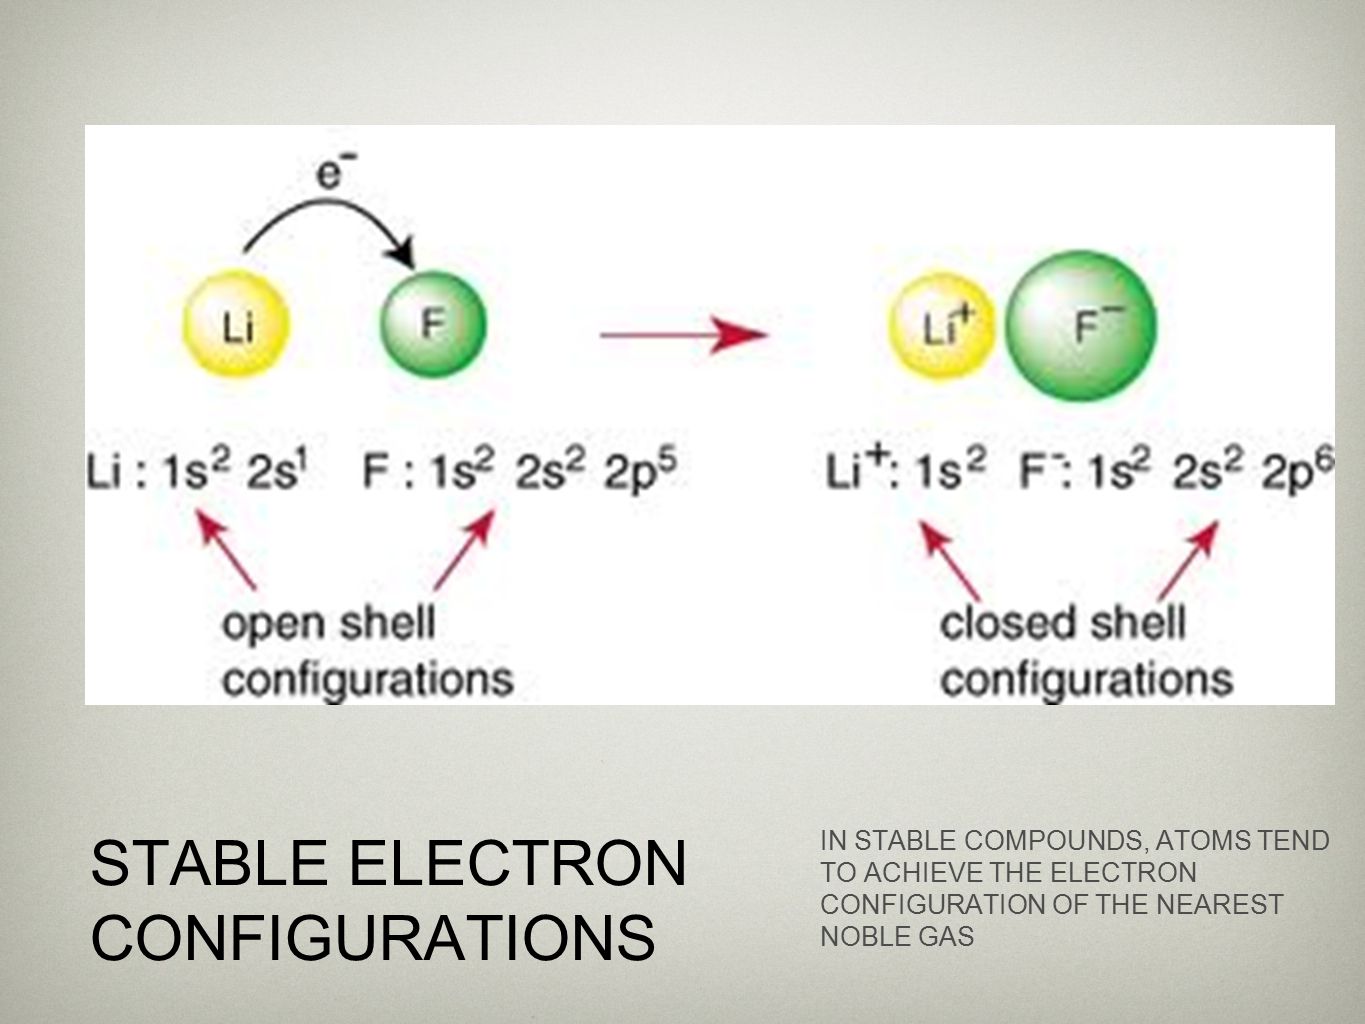 STABLE ELECTRON CONFIGURATIONS